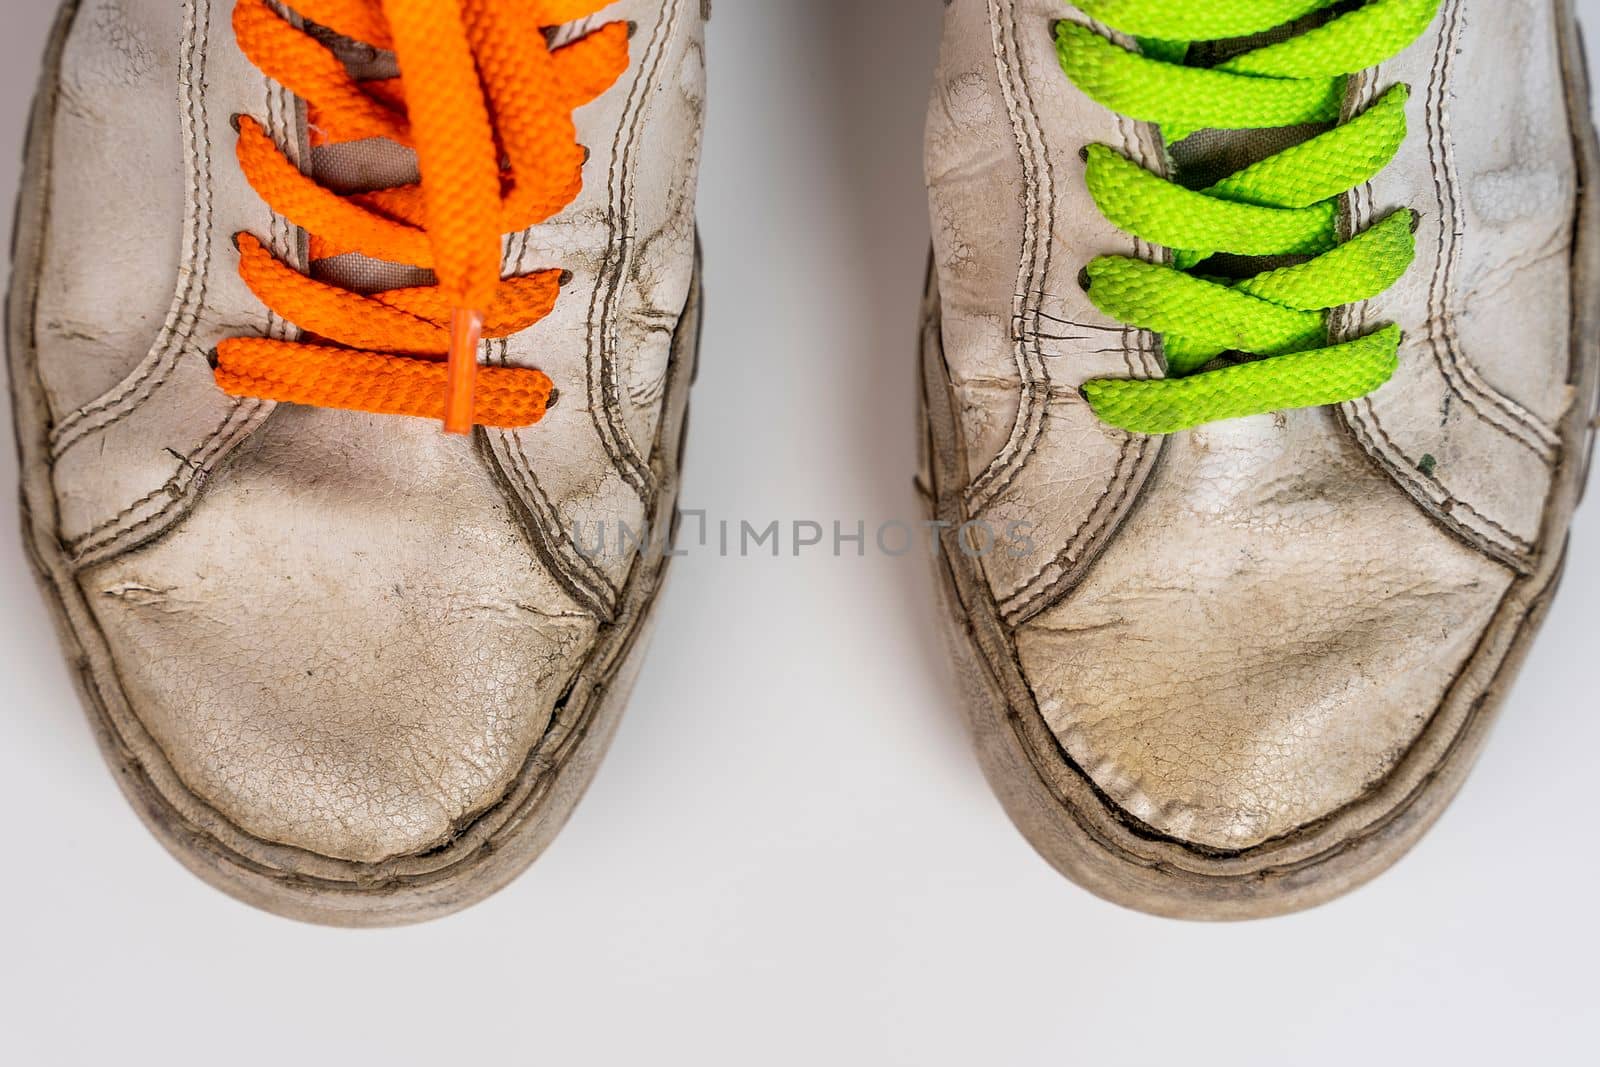 worn old torn white sneakers with colored laces on a white background by audiznam2609